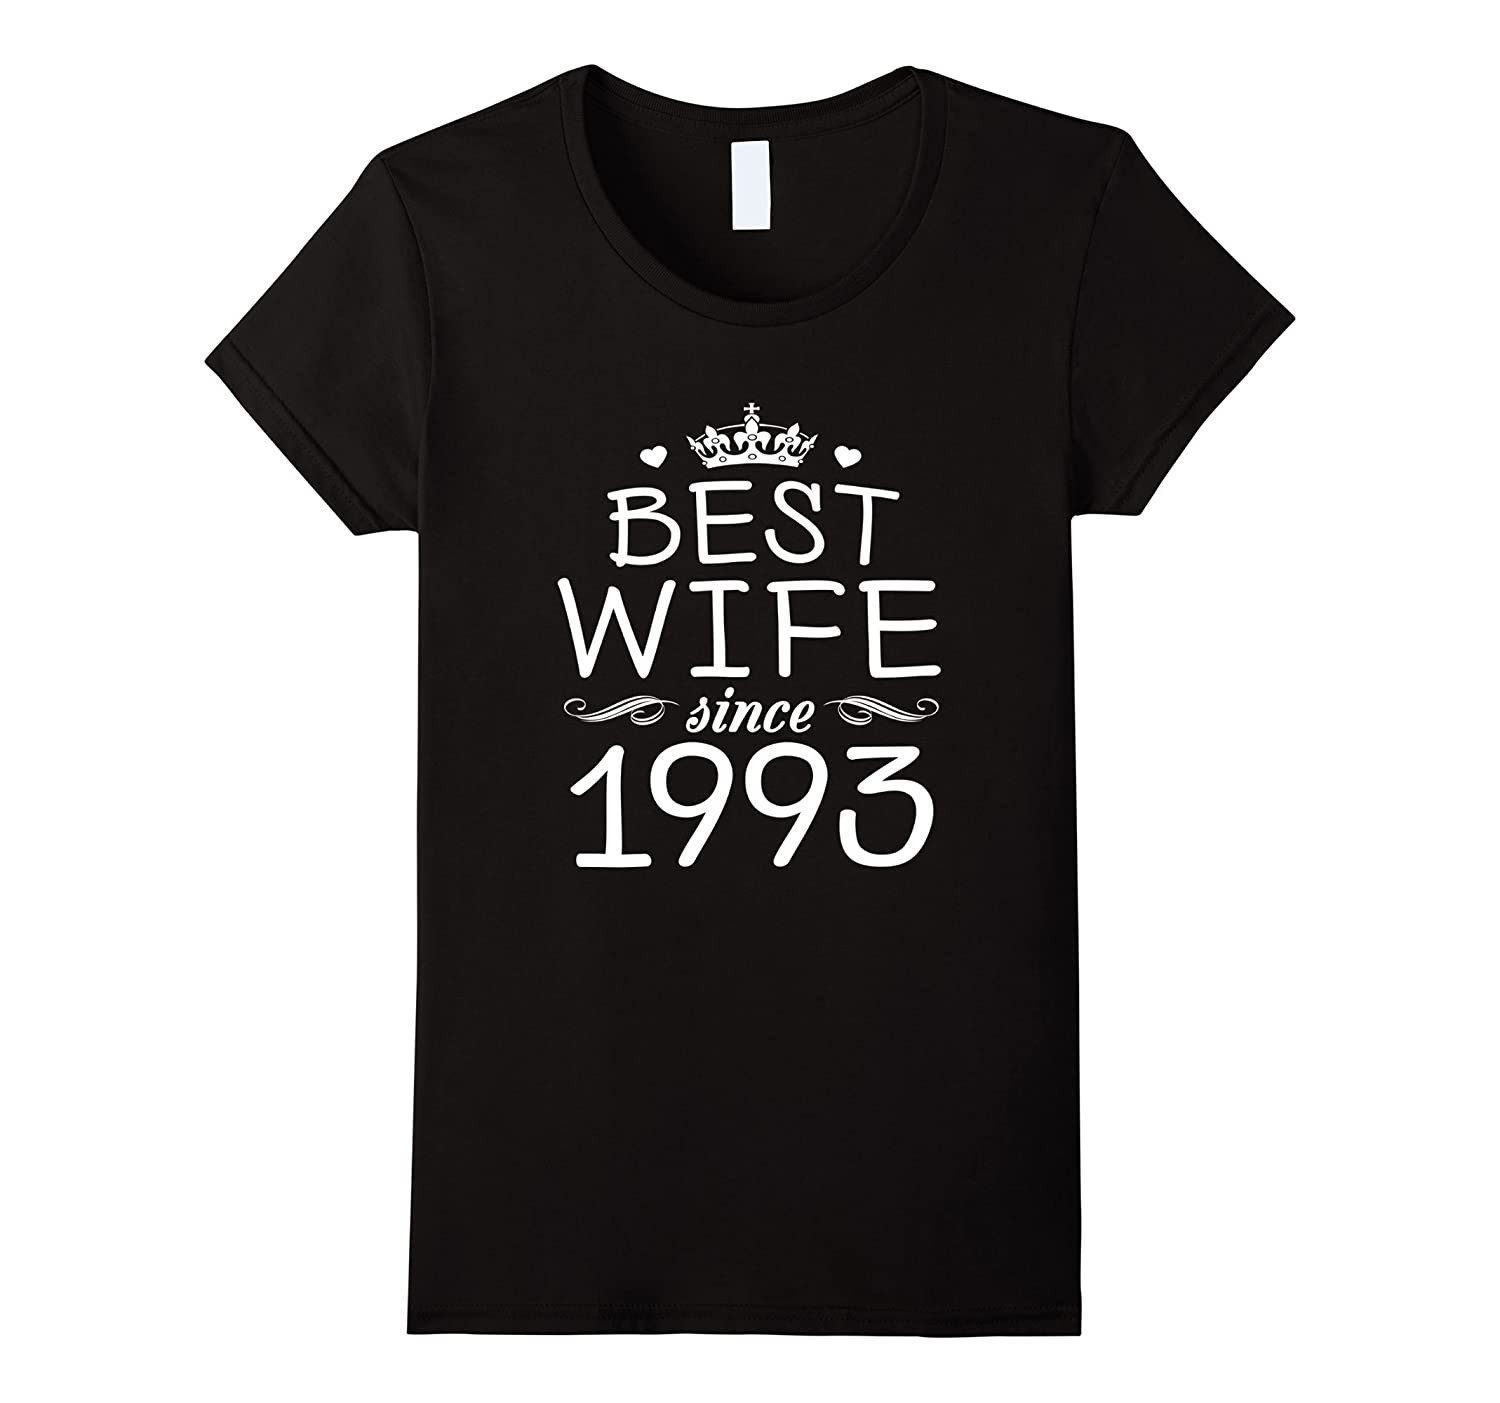 24Th Anniversary Gift Ideas
 24th Wedding Anniversary Gift Ideas For Her Wife Since 1993